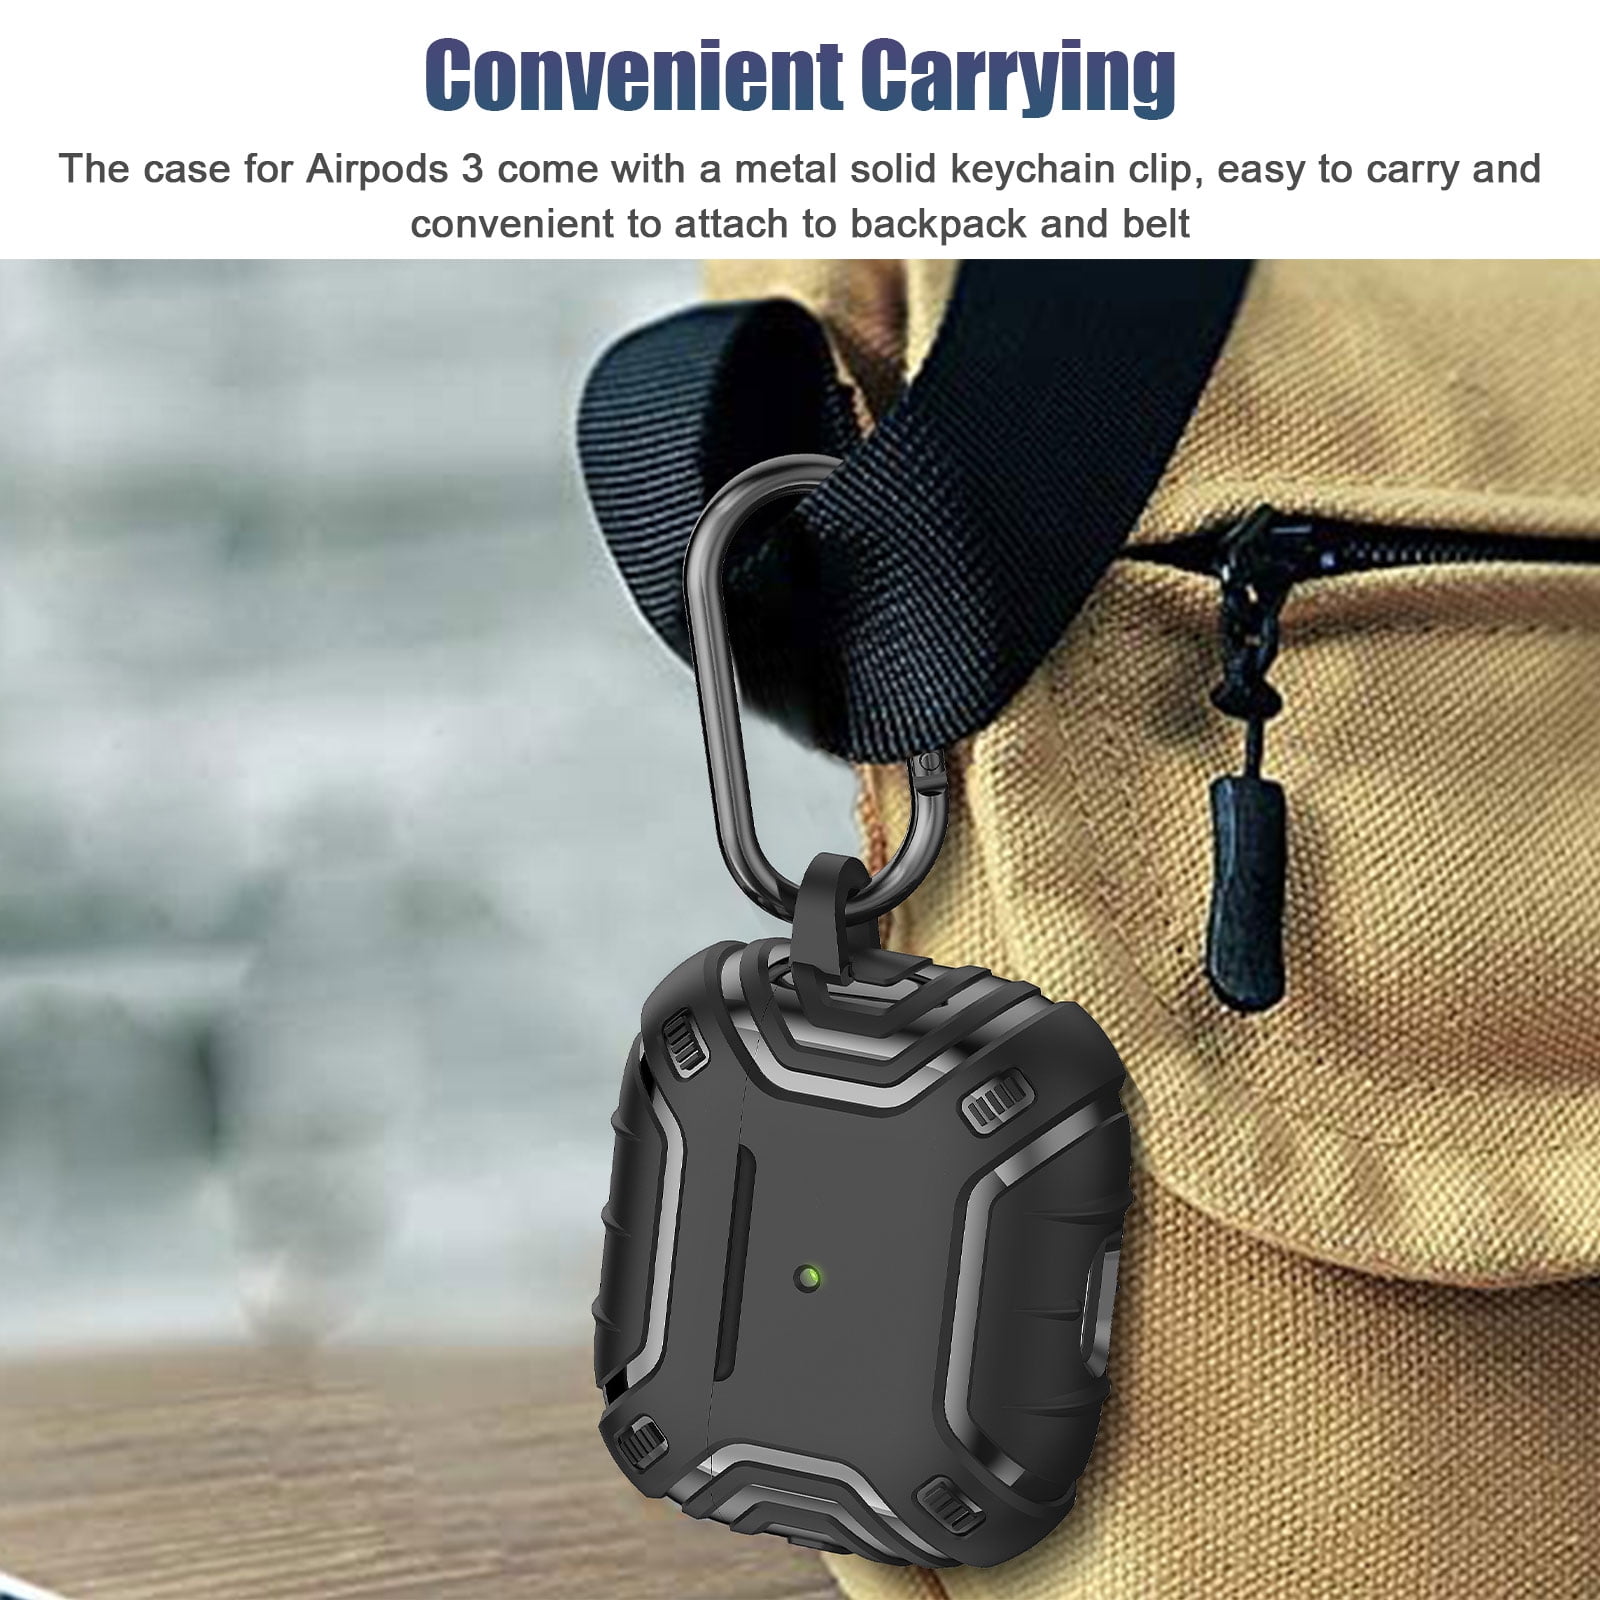 QINGQING Airpods 3rd Generation Cases 2021 Switch Case for Airpods 3 Case  Cover Men Kids Teens Boys …See more QINGQING Airpods 3rd Generation Cases